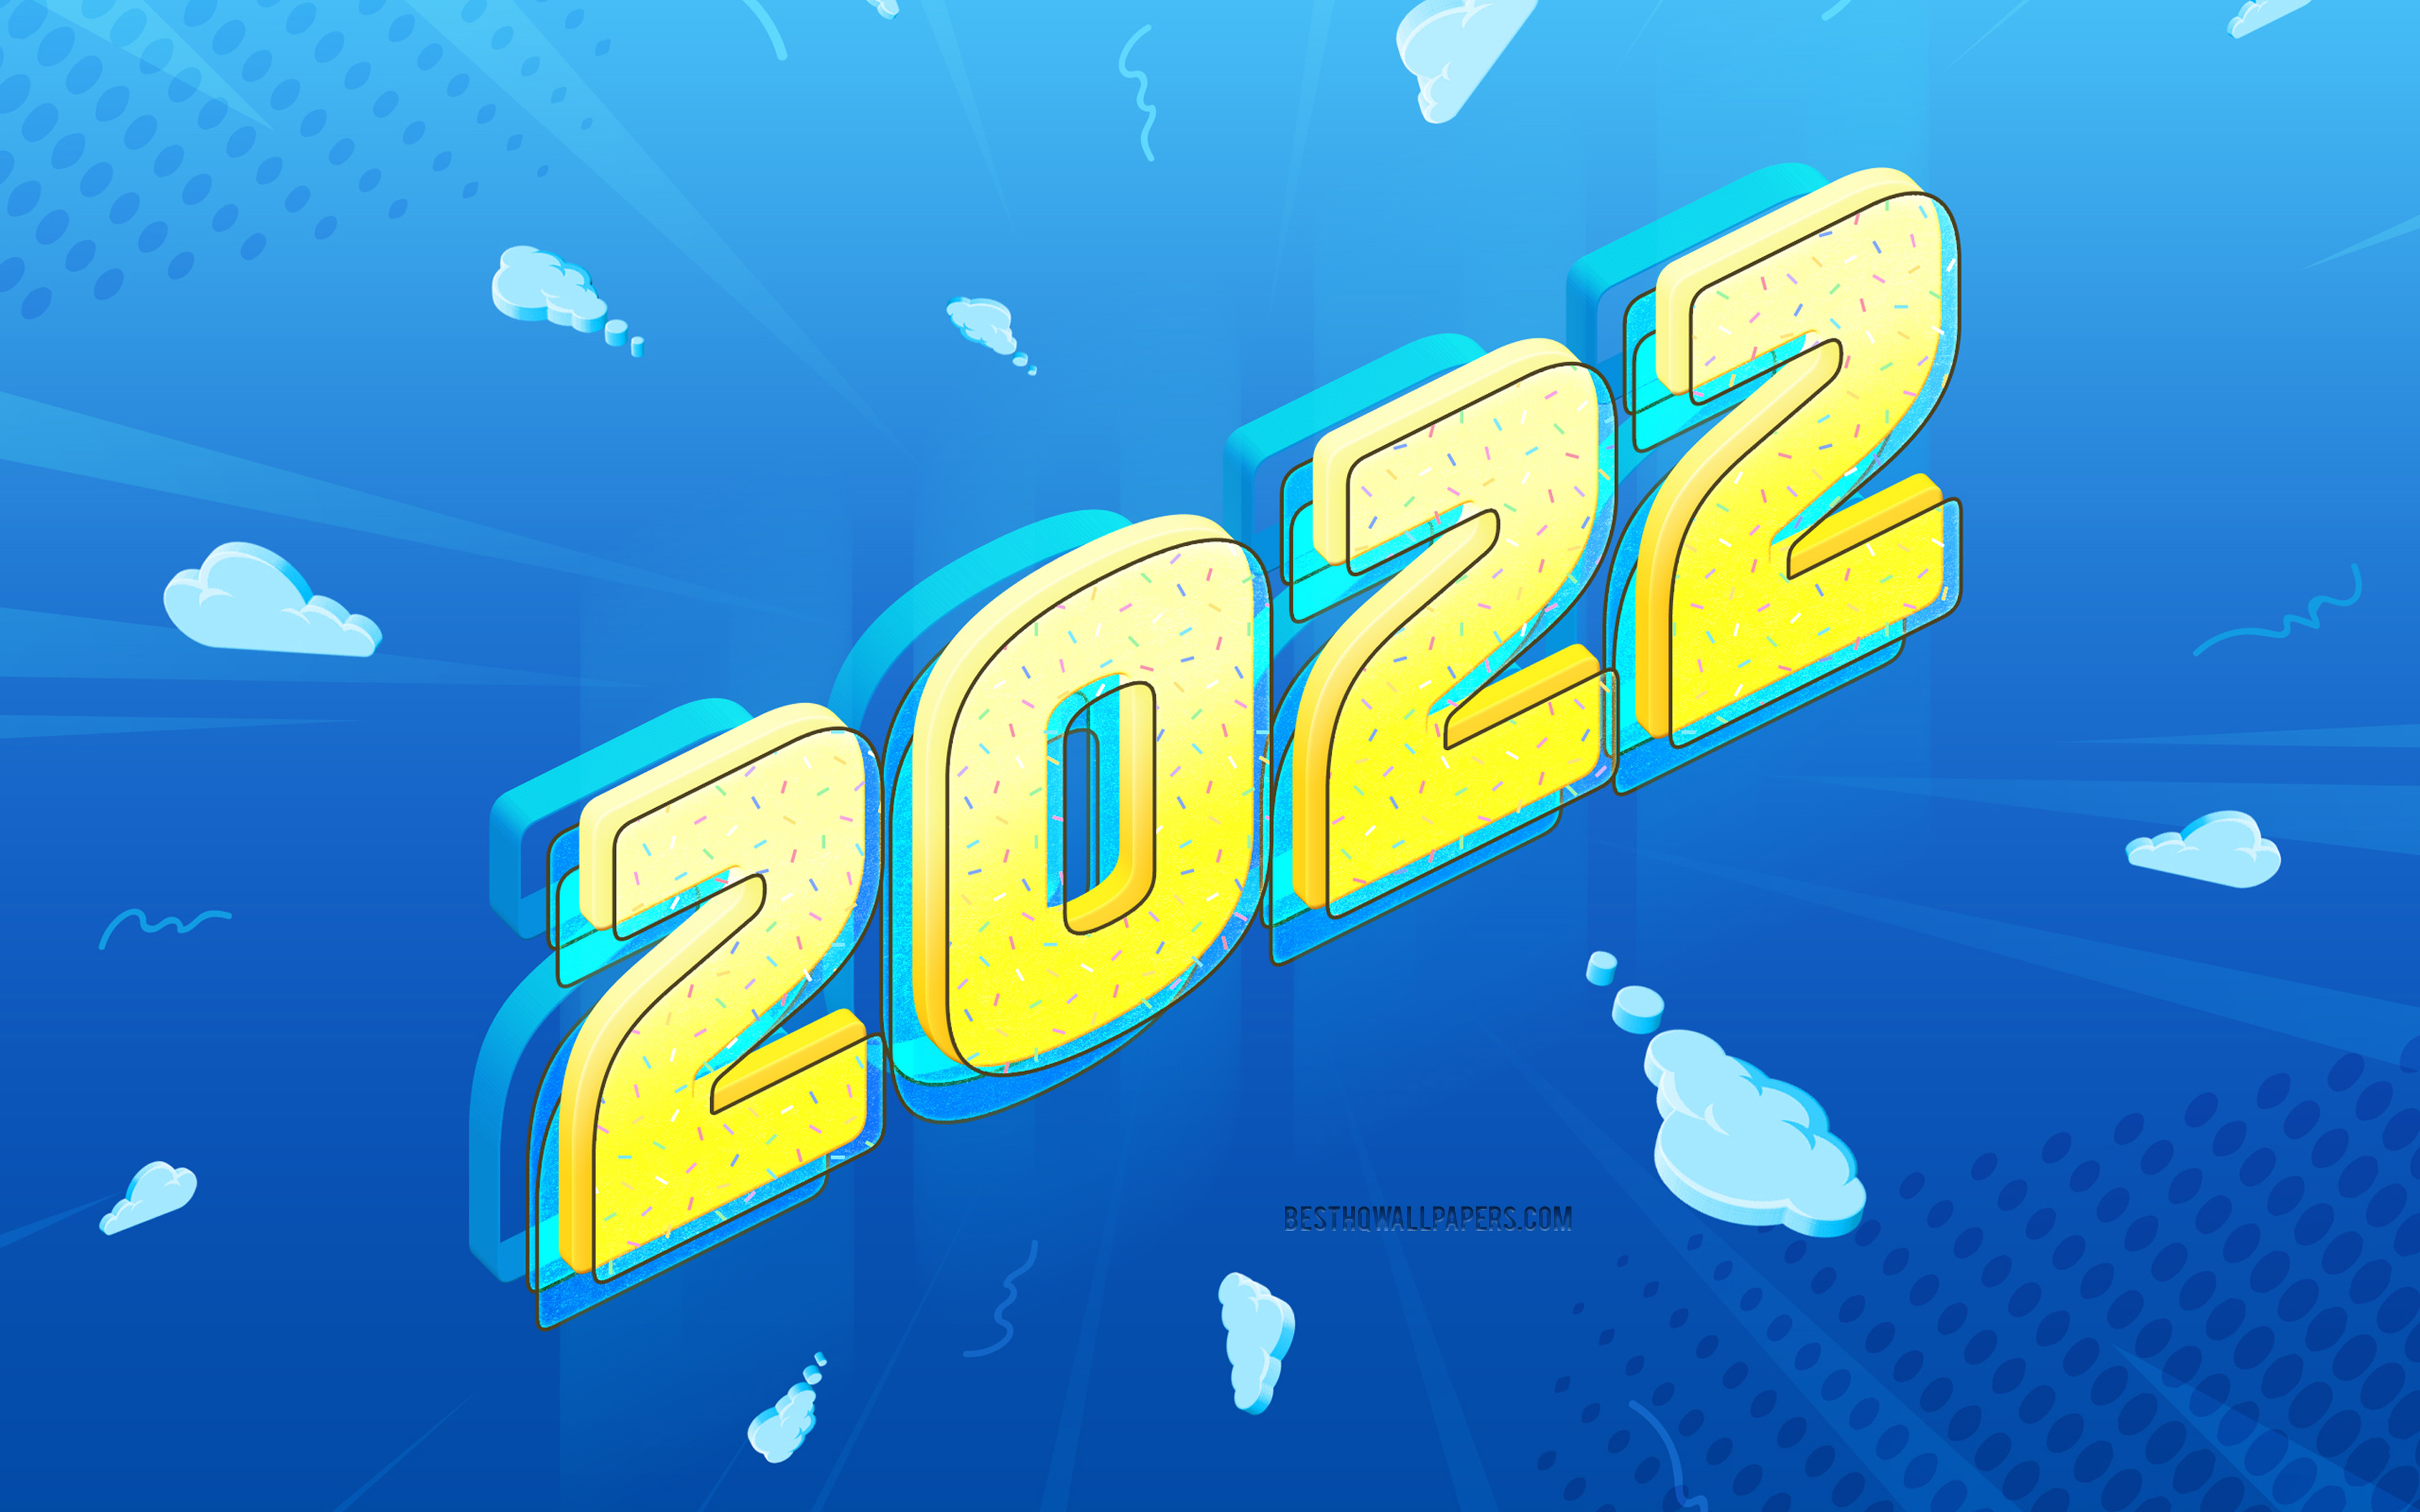 Download wallpaper 2022 New Year, blue background, 2022 3D art, Happy New Year yellow 3D letters, 2022 concepts, 2022 3D background, 2022 blue background, 2022 greeting card for desktop with resolution 3840x2400. High Quality HD picture wallpaper